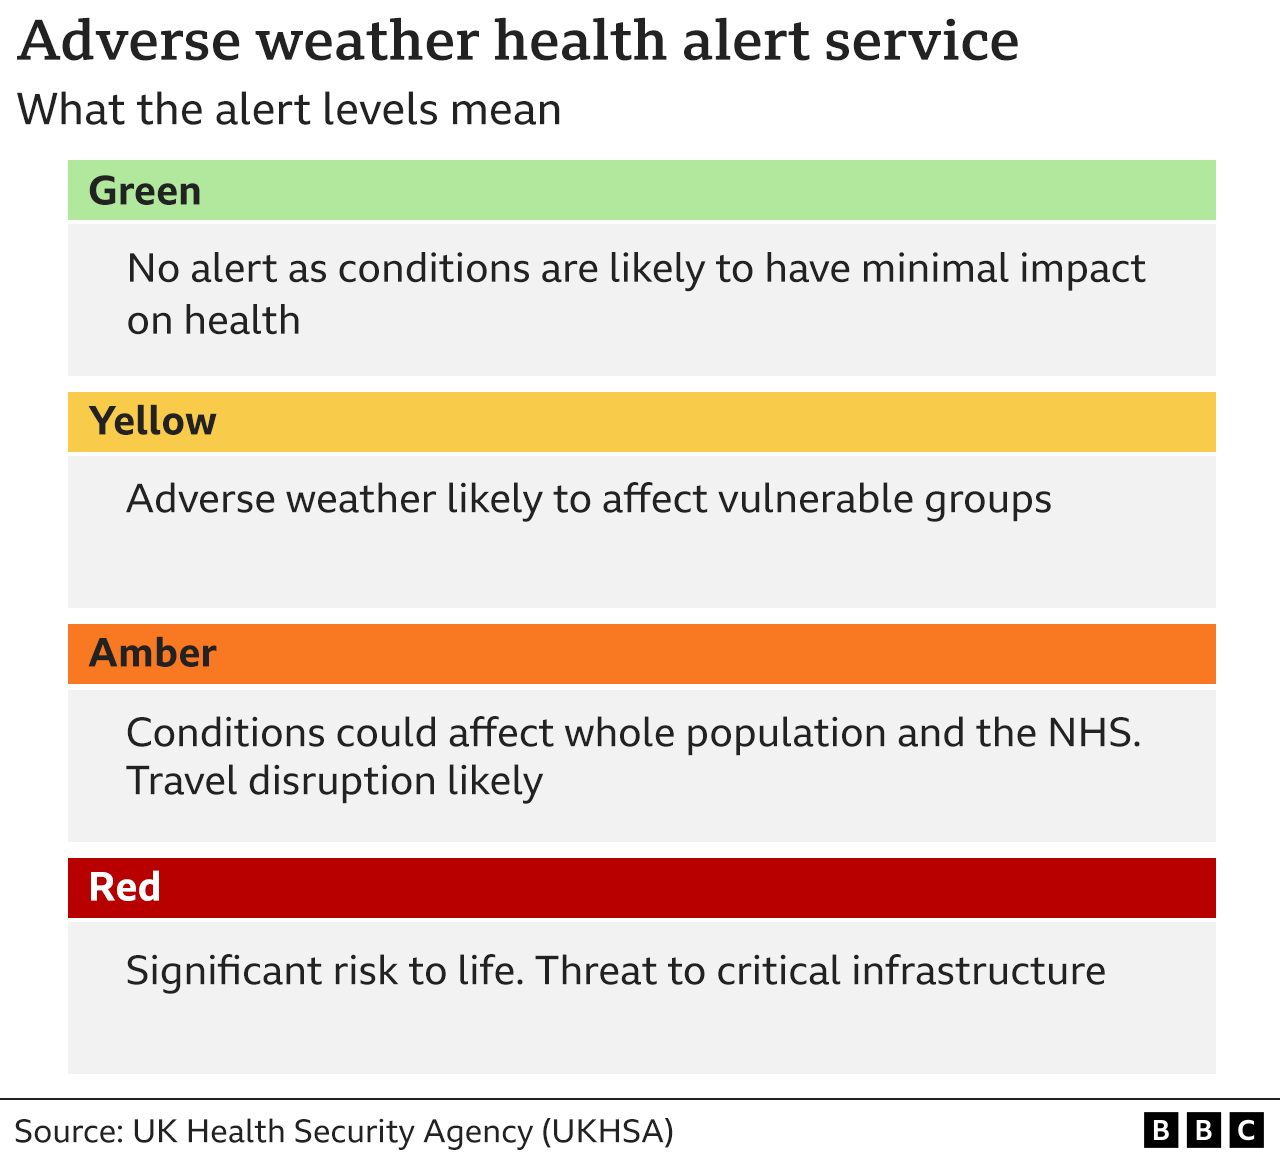 Graphic explaining the difference adverse weather health alert levels